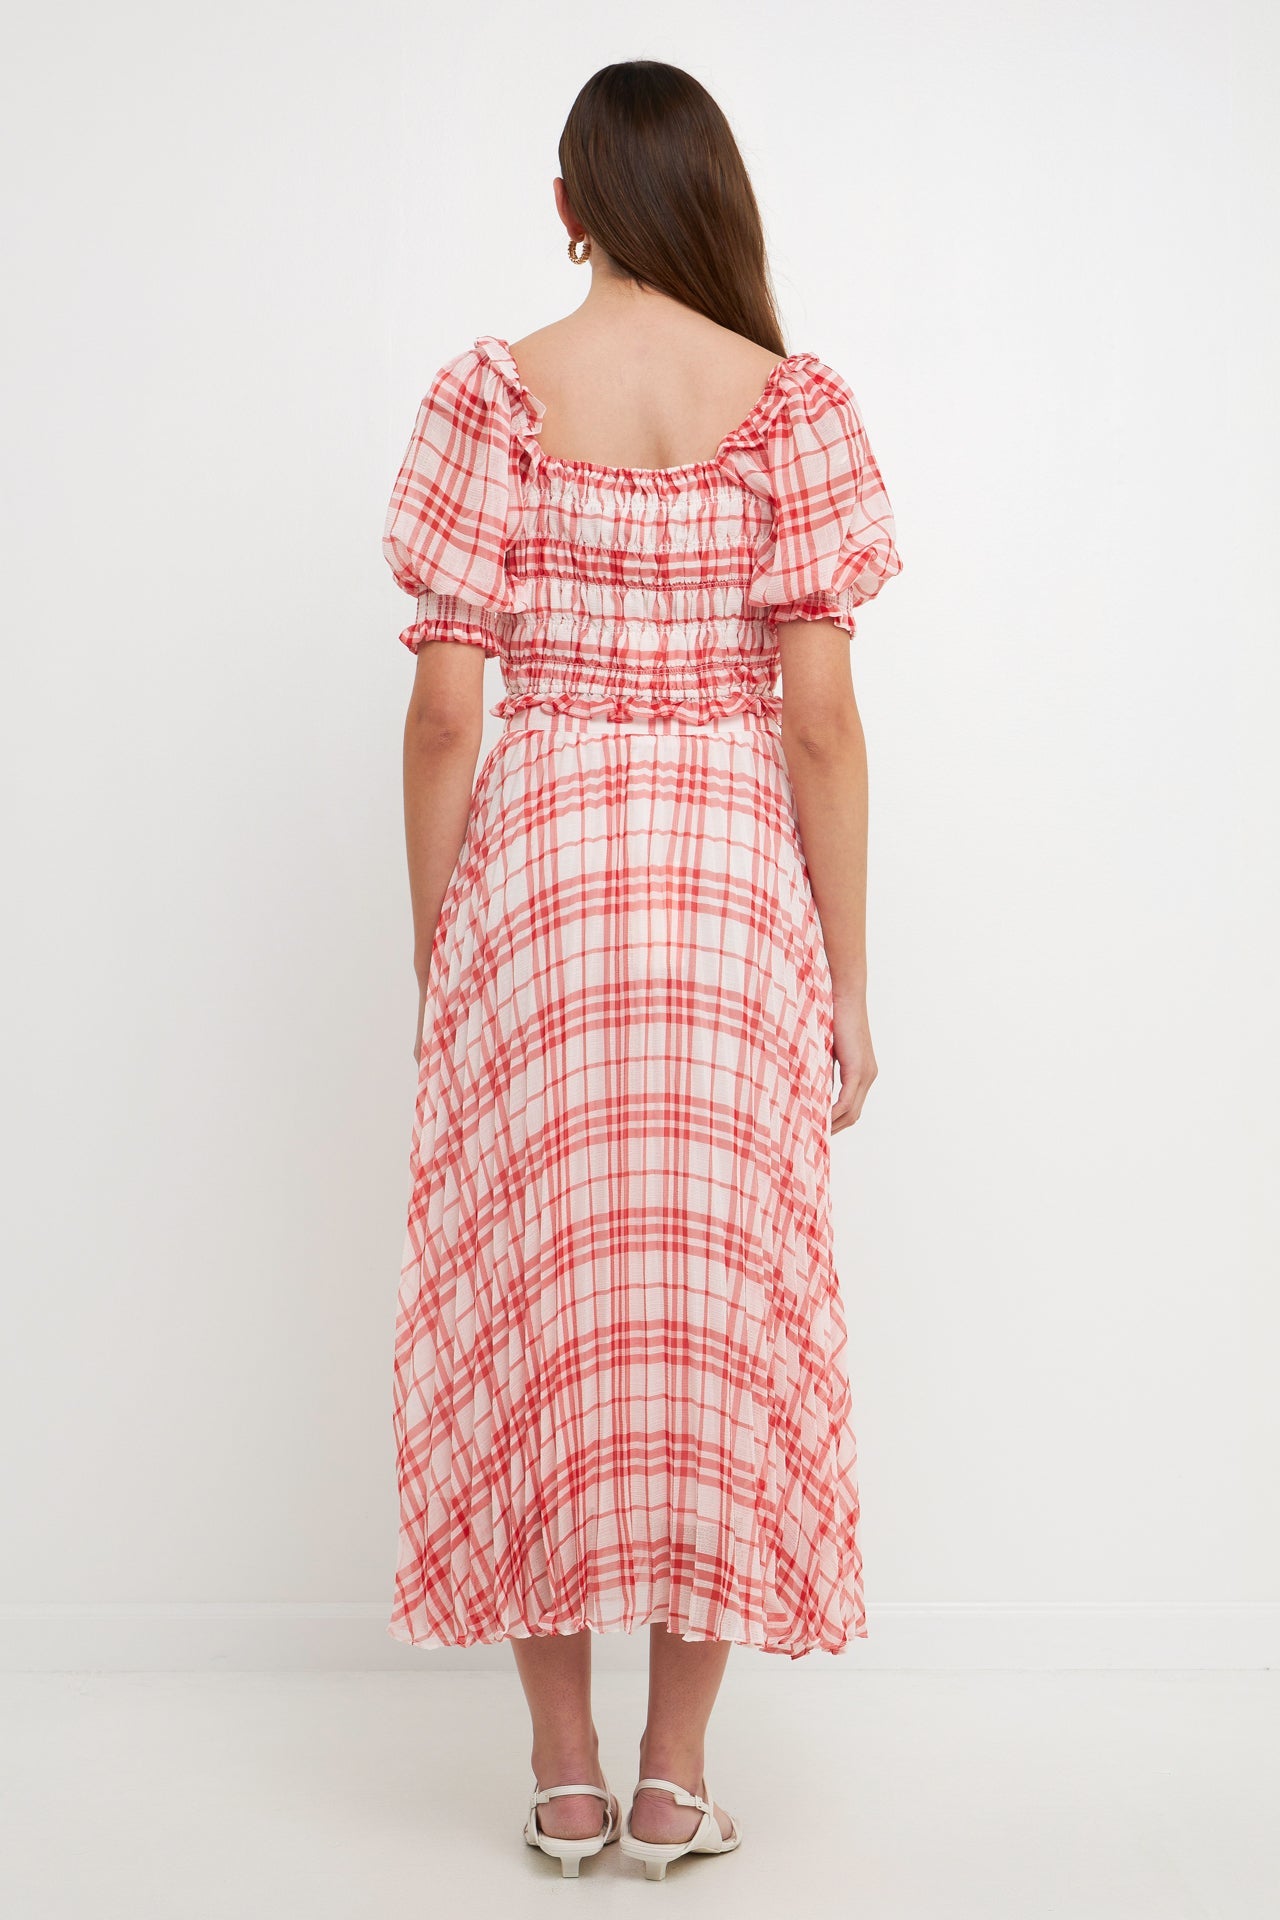 ENDLESS ROSE - Gingham Smocked Top - TOPS available at Objectrare